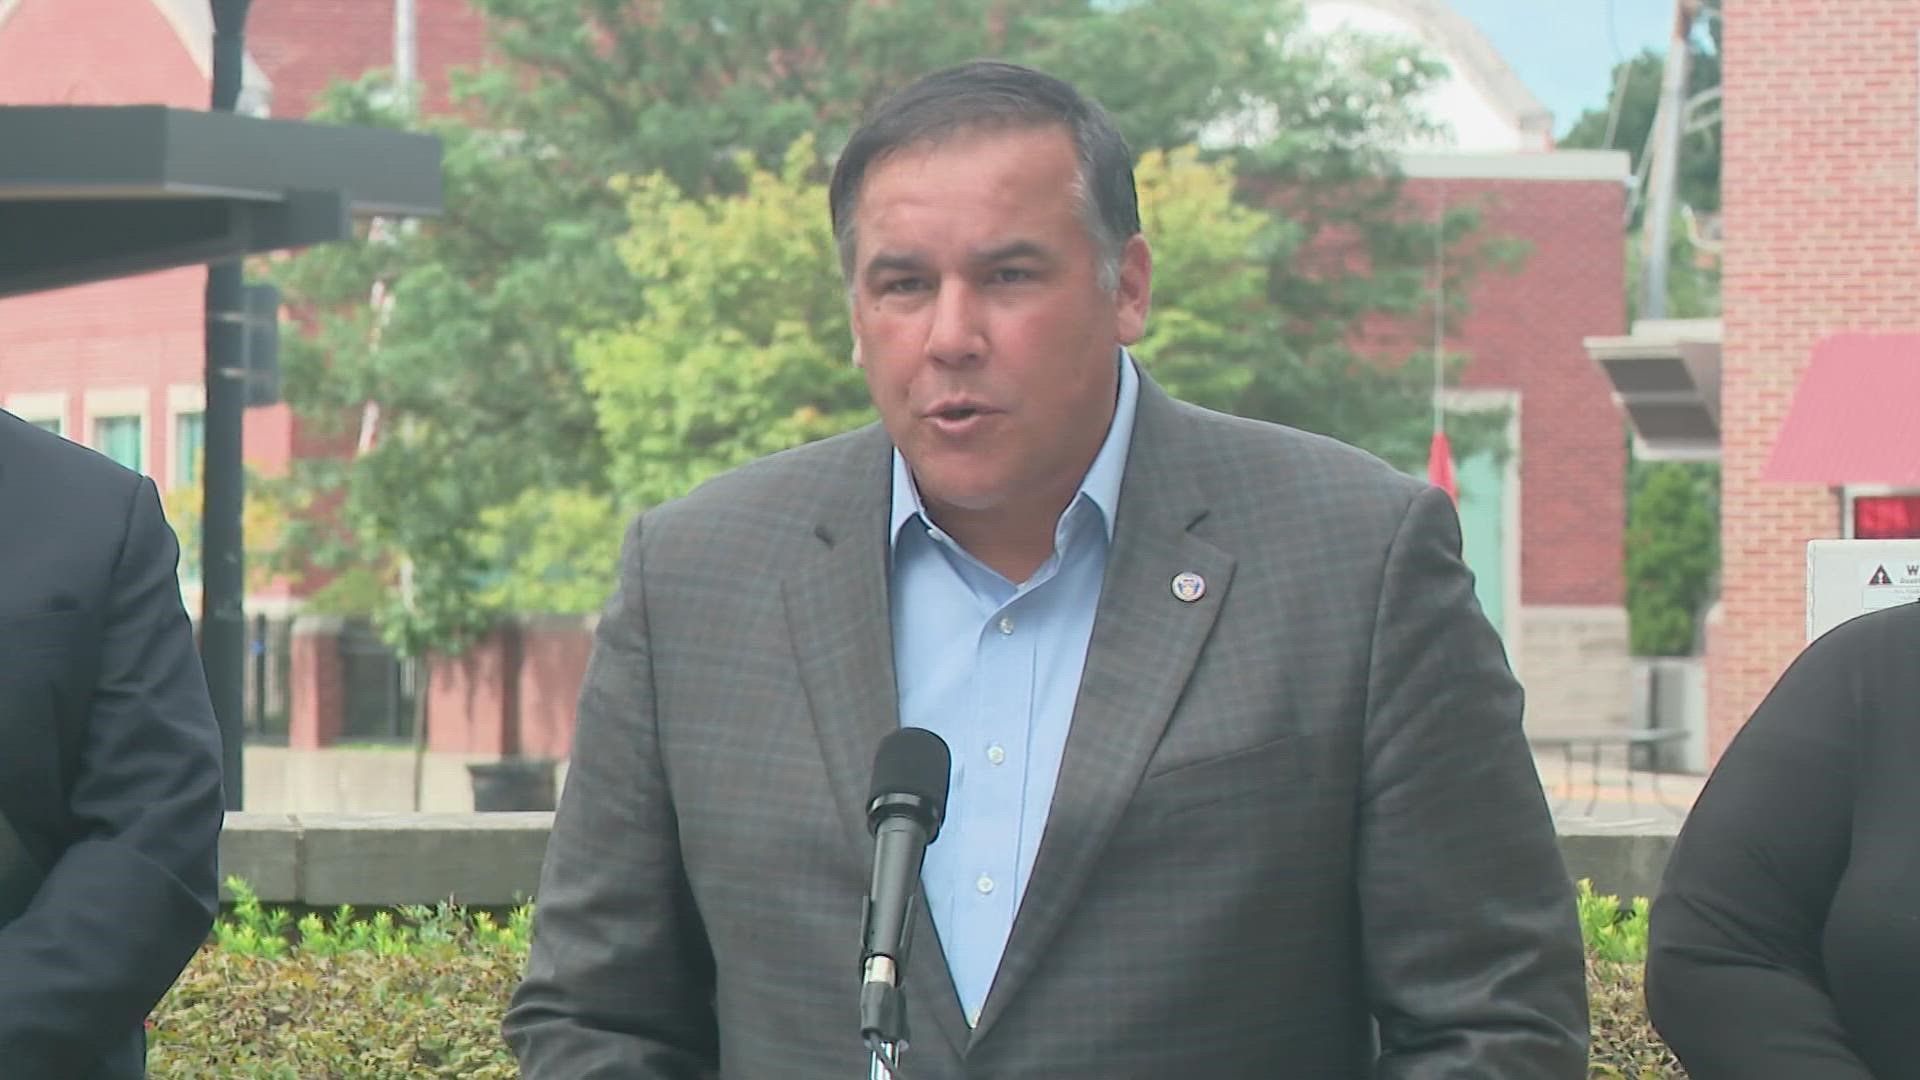 Columbus Mayor Andrew Ginther said the number of homicides this year compared to 2021 is down 37%.